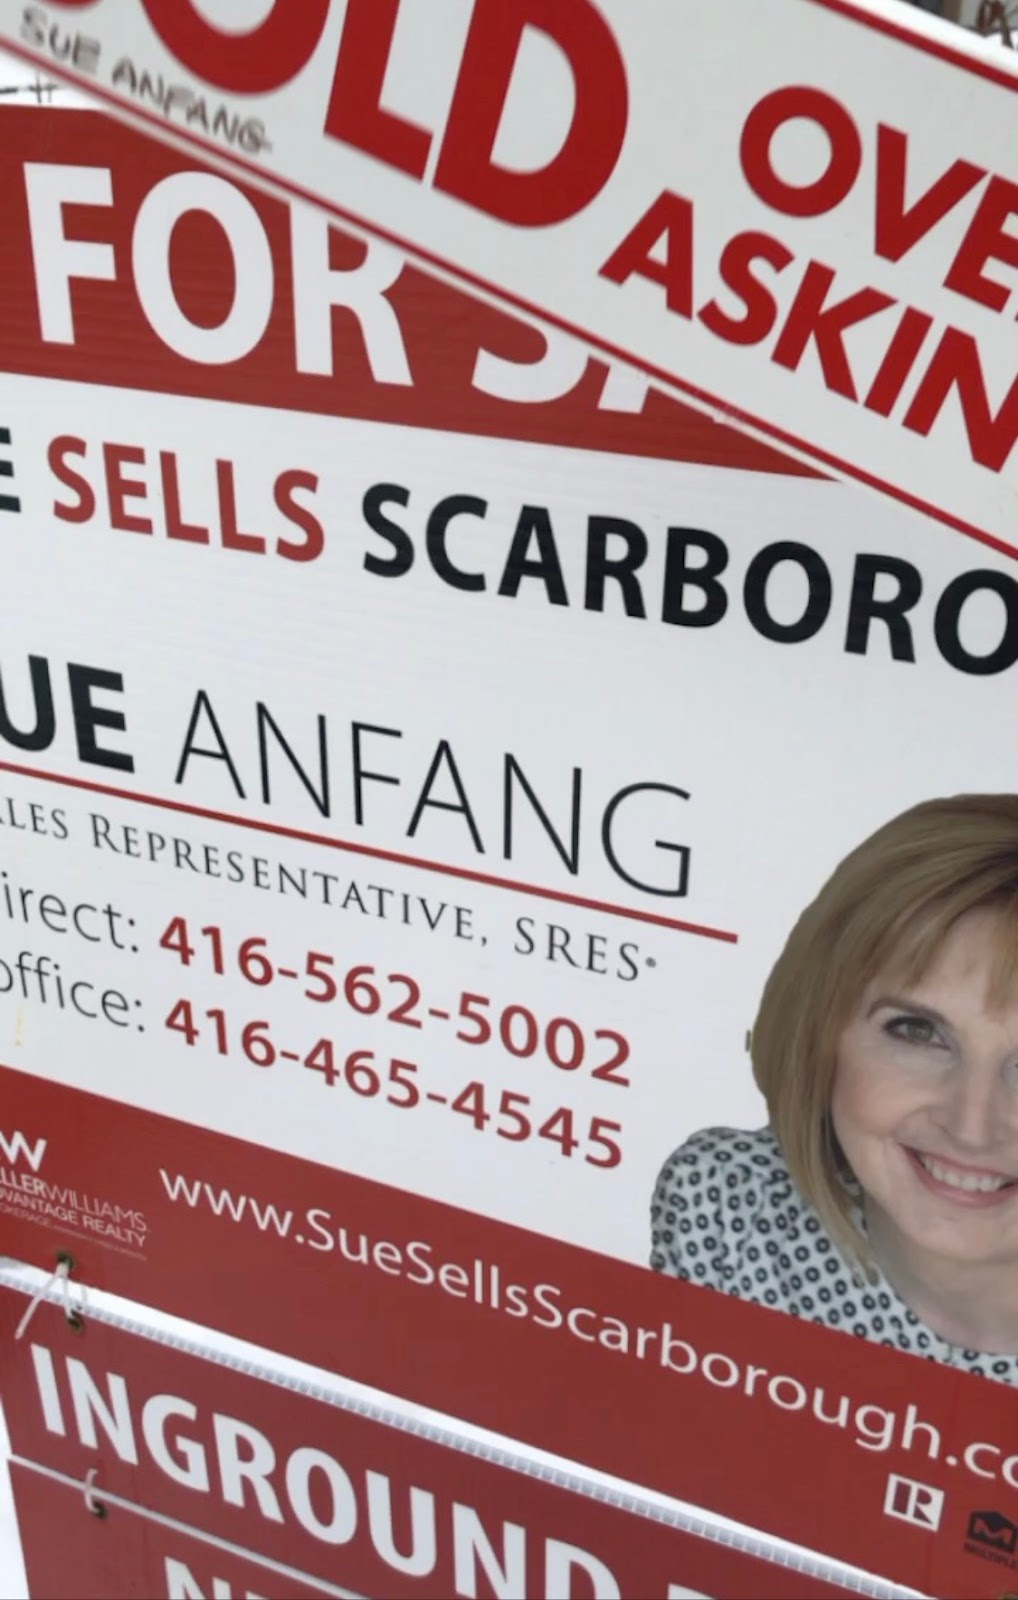 Sue Anfang Real Estate | real estate agency | 93 Holmcrest Trail, Scarborough, ON M1C 1V8, Canada | 4165625002 OR +1 416-562-5002